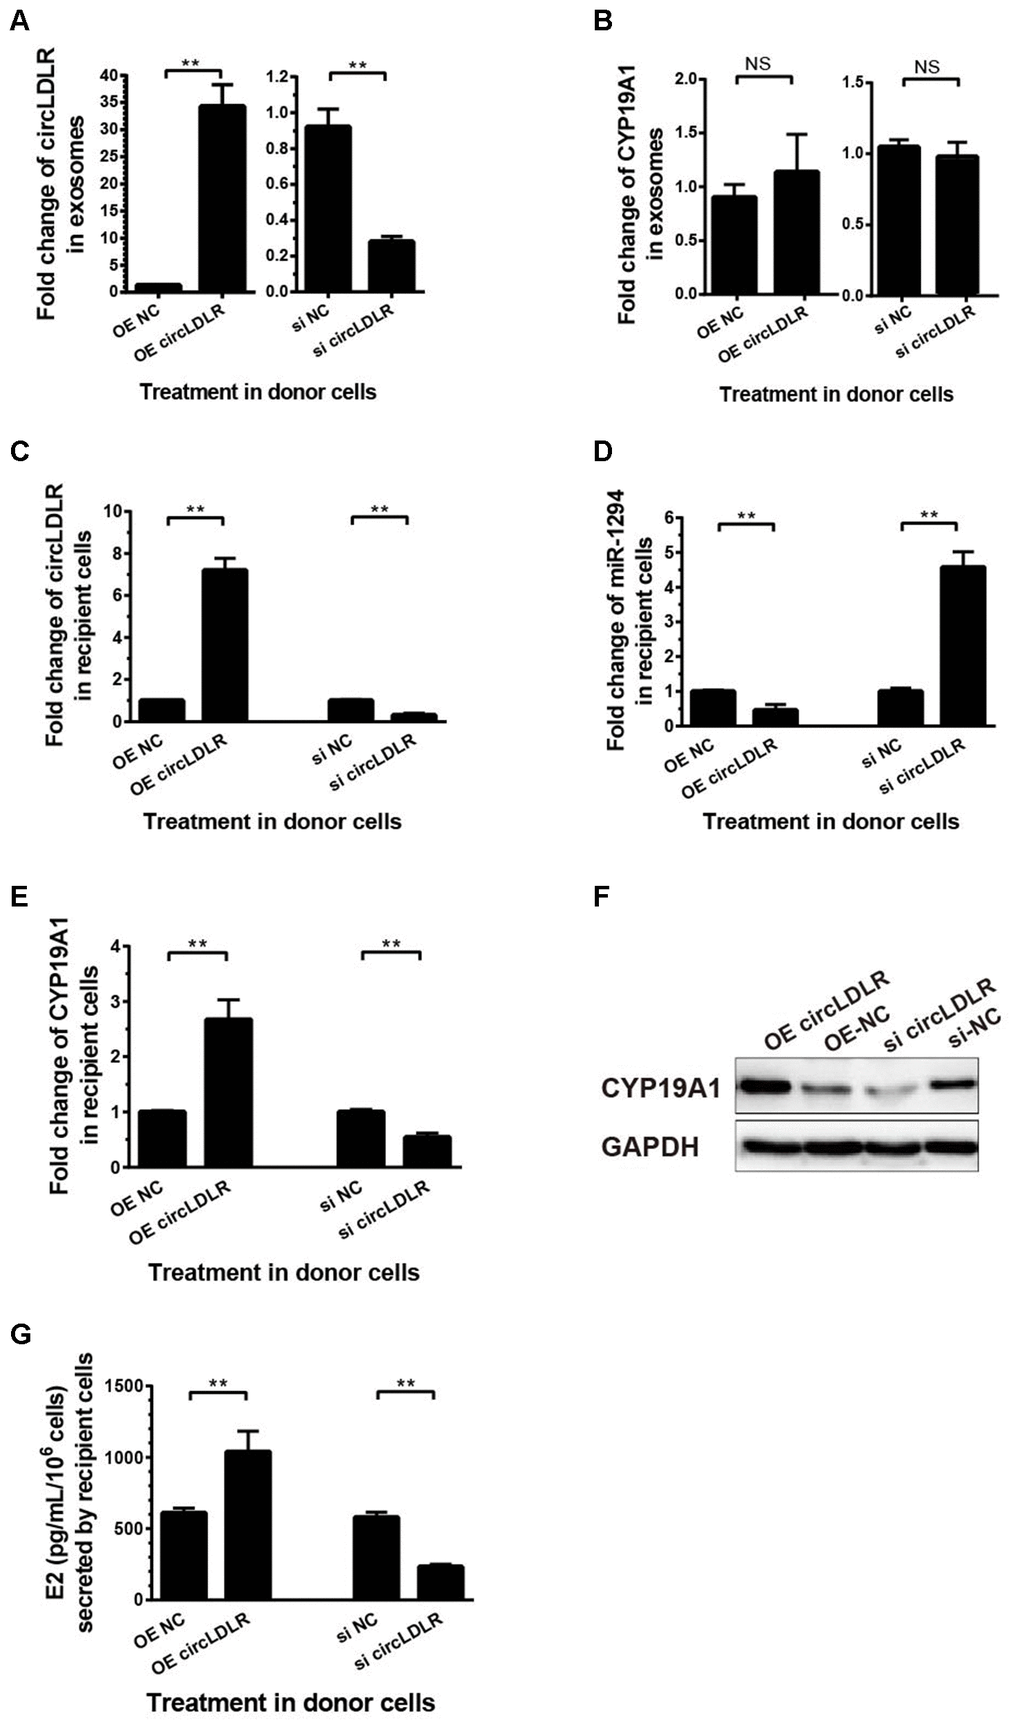 The regulatory role of circLDLR-miR-1294-CYP19A1 ceRNA network in KGN cells. (A) Overexpression (OE) or siRNA knockdown (si) of circLDLR in KGN donor cells changed circLDLR level in exosomes. (B) The abundance of CYP19A1 in exosomes from KGN donor cells with overexpression (OE) or siRNA knockdown (si) of circLDLR. (C) The expression level of circLDLR in recipient cells was changed by exosomes derived from donor cells with altered circLDLR expression. (D) The expression level of miR-1294 in recipient cells was inversely changed by exosomes derived from donor cells with altered circLDLR expression. (E, F) CYP19A1 expression in recipient cells was accordingly affected by exosomes derived from donor cells with altered circLDLR expresson at both RNA level (E) and protein level (F). GAPDH was used as the internal controls for circLDLR and CYP19A1. U6 was used as the internal controls for miR-1294. (G) Effects of exosomal circLDLR on E2 production in the recipient KGN cells. Each experiment was performed six times. OE, over expression circLDLR; si, knockdown circLDLR by siRNA; NC, negative control (empty vector or negative siRNA, accordingly). * indicates p 